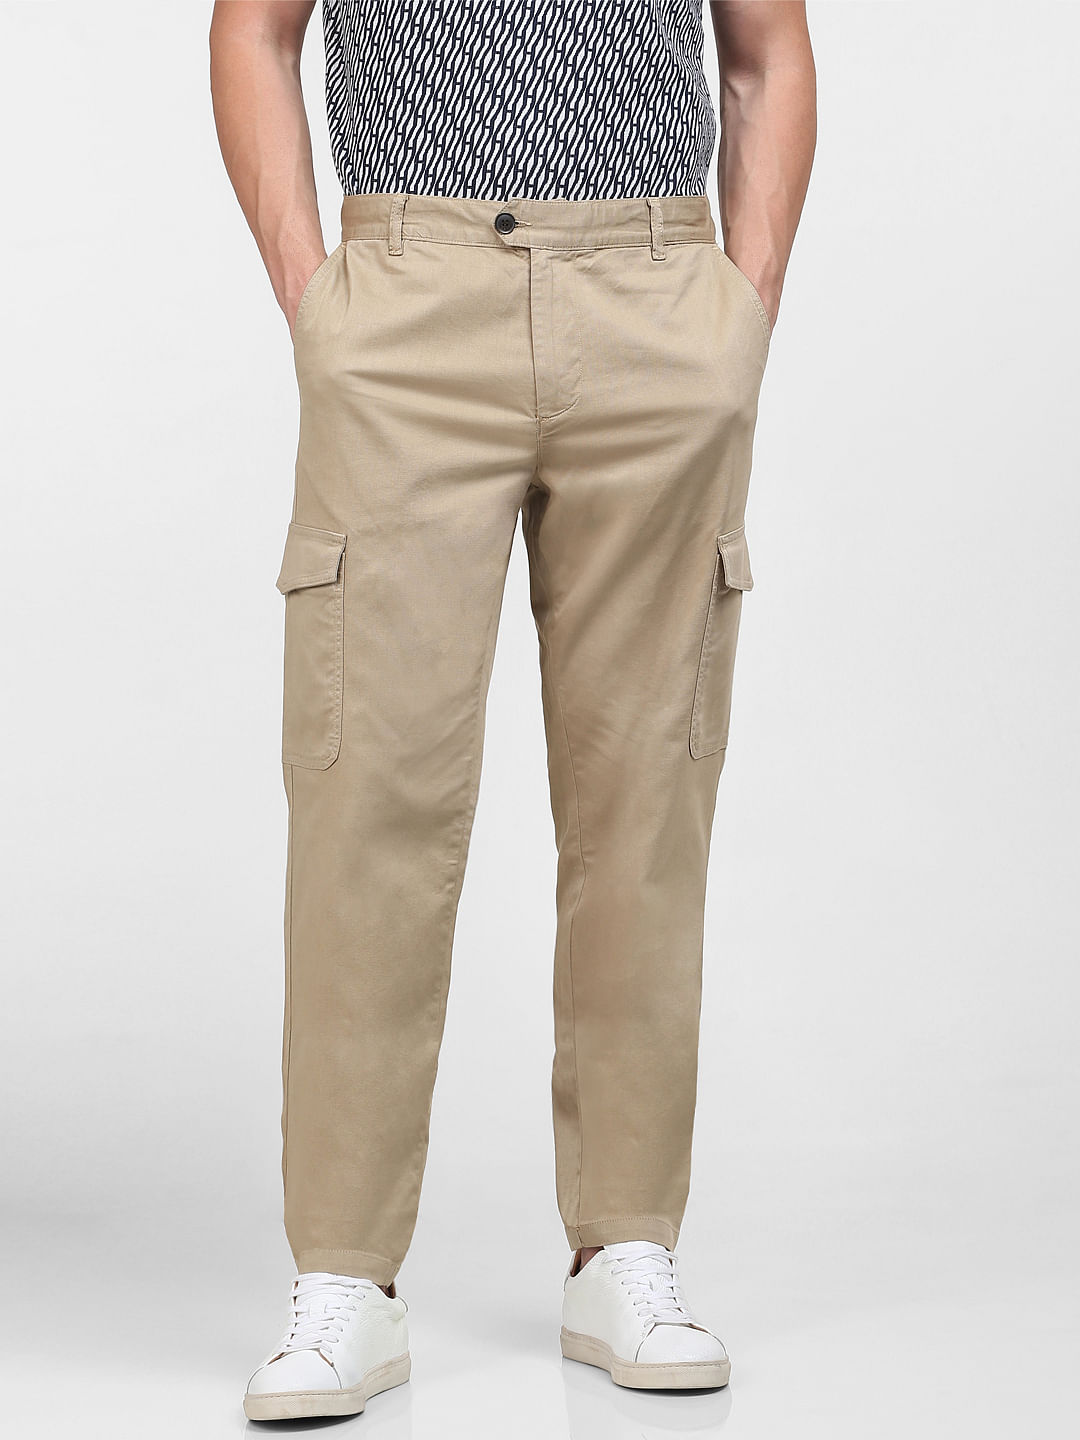 Bottomwear | Joggers | Gym Shorts | Track Pants Online For Men – New Theory